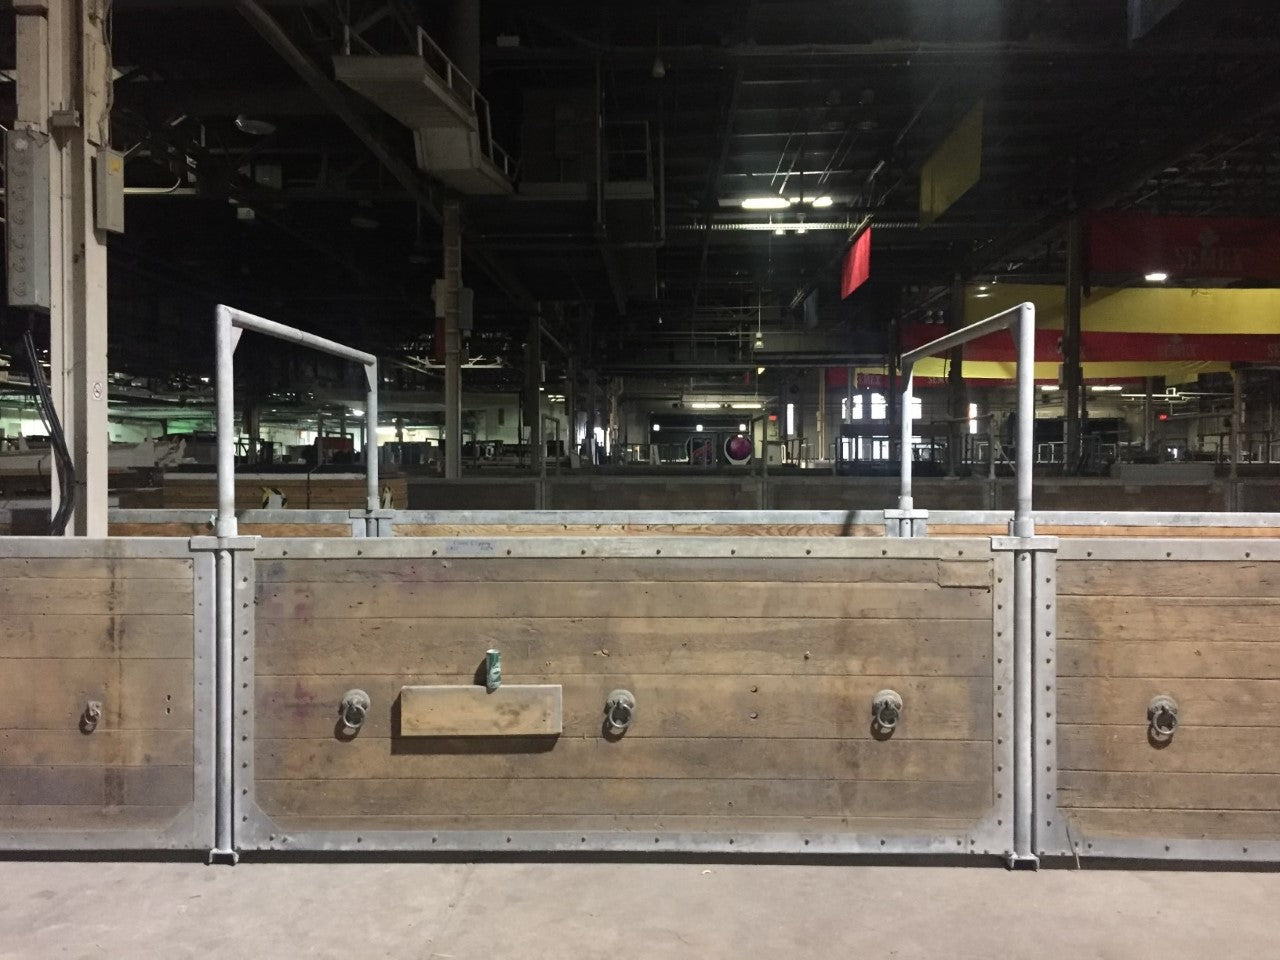 Royal Fair Cattle Stalls- Buy More & Save!